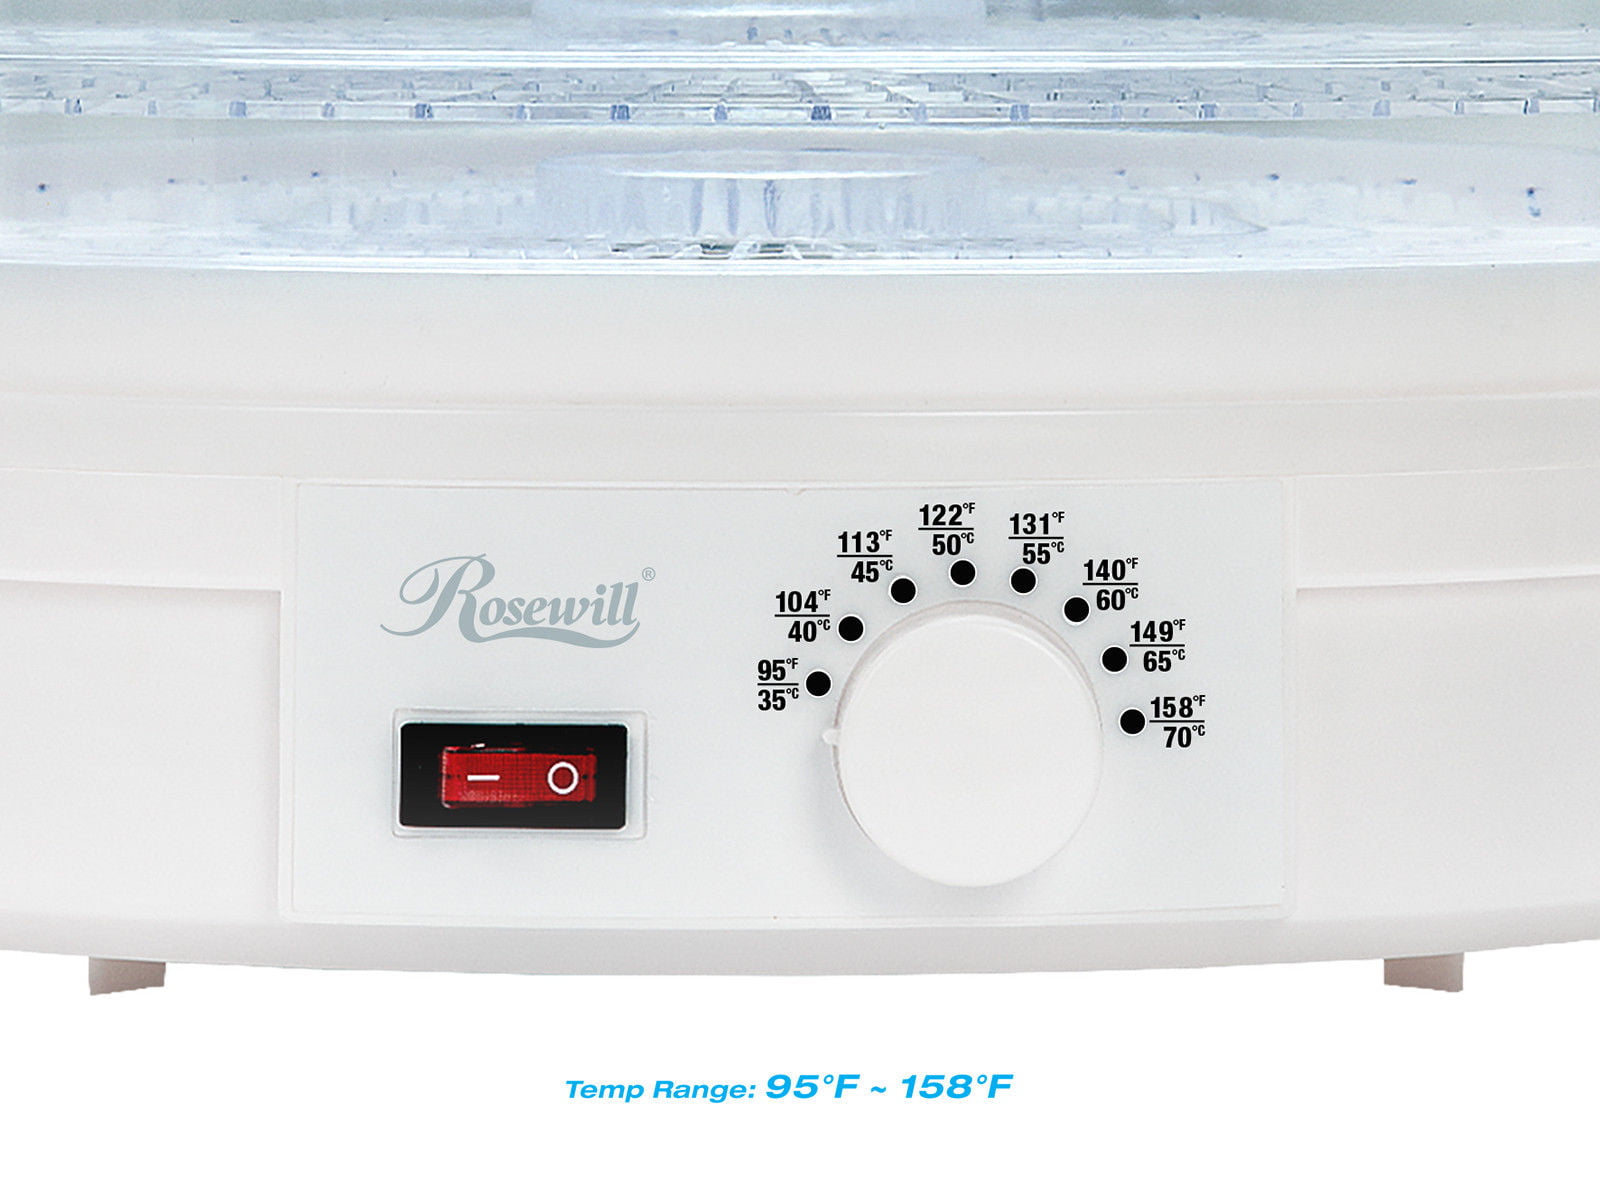 Rosewill RHFD-15001 Countertop Portable Electric Machine Food